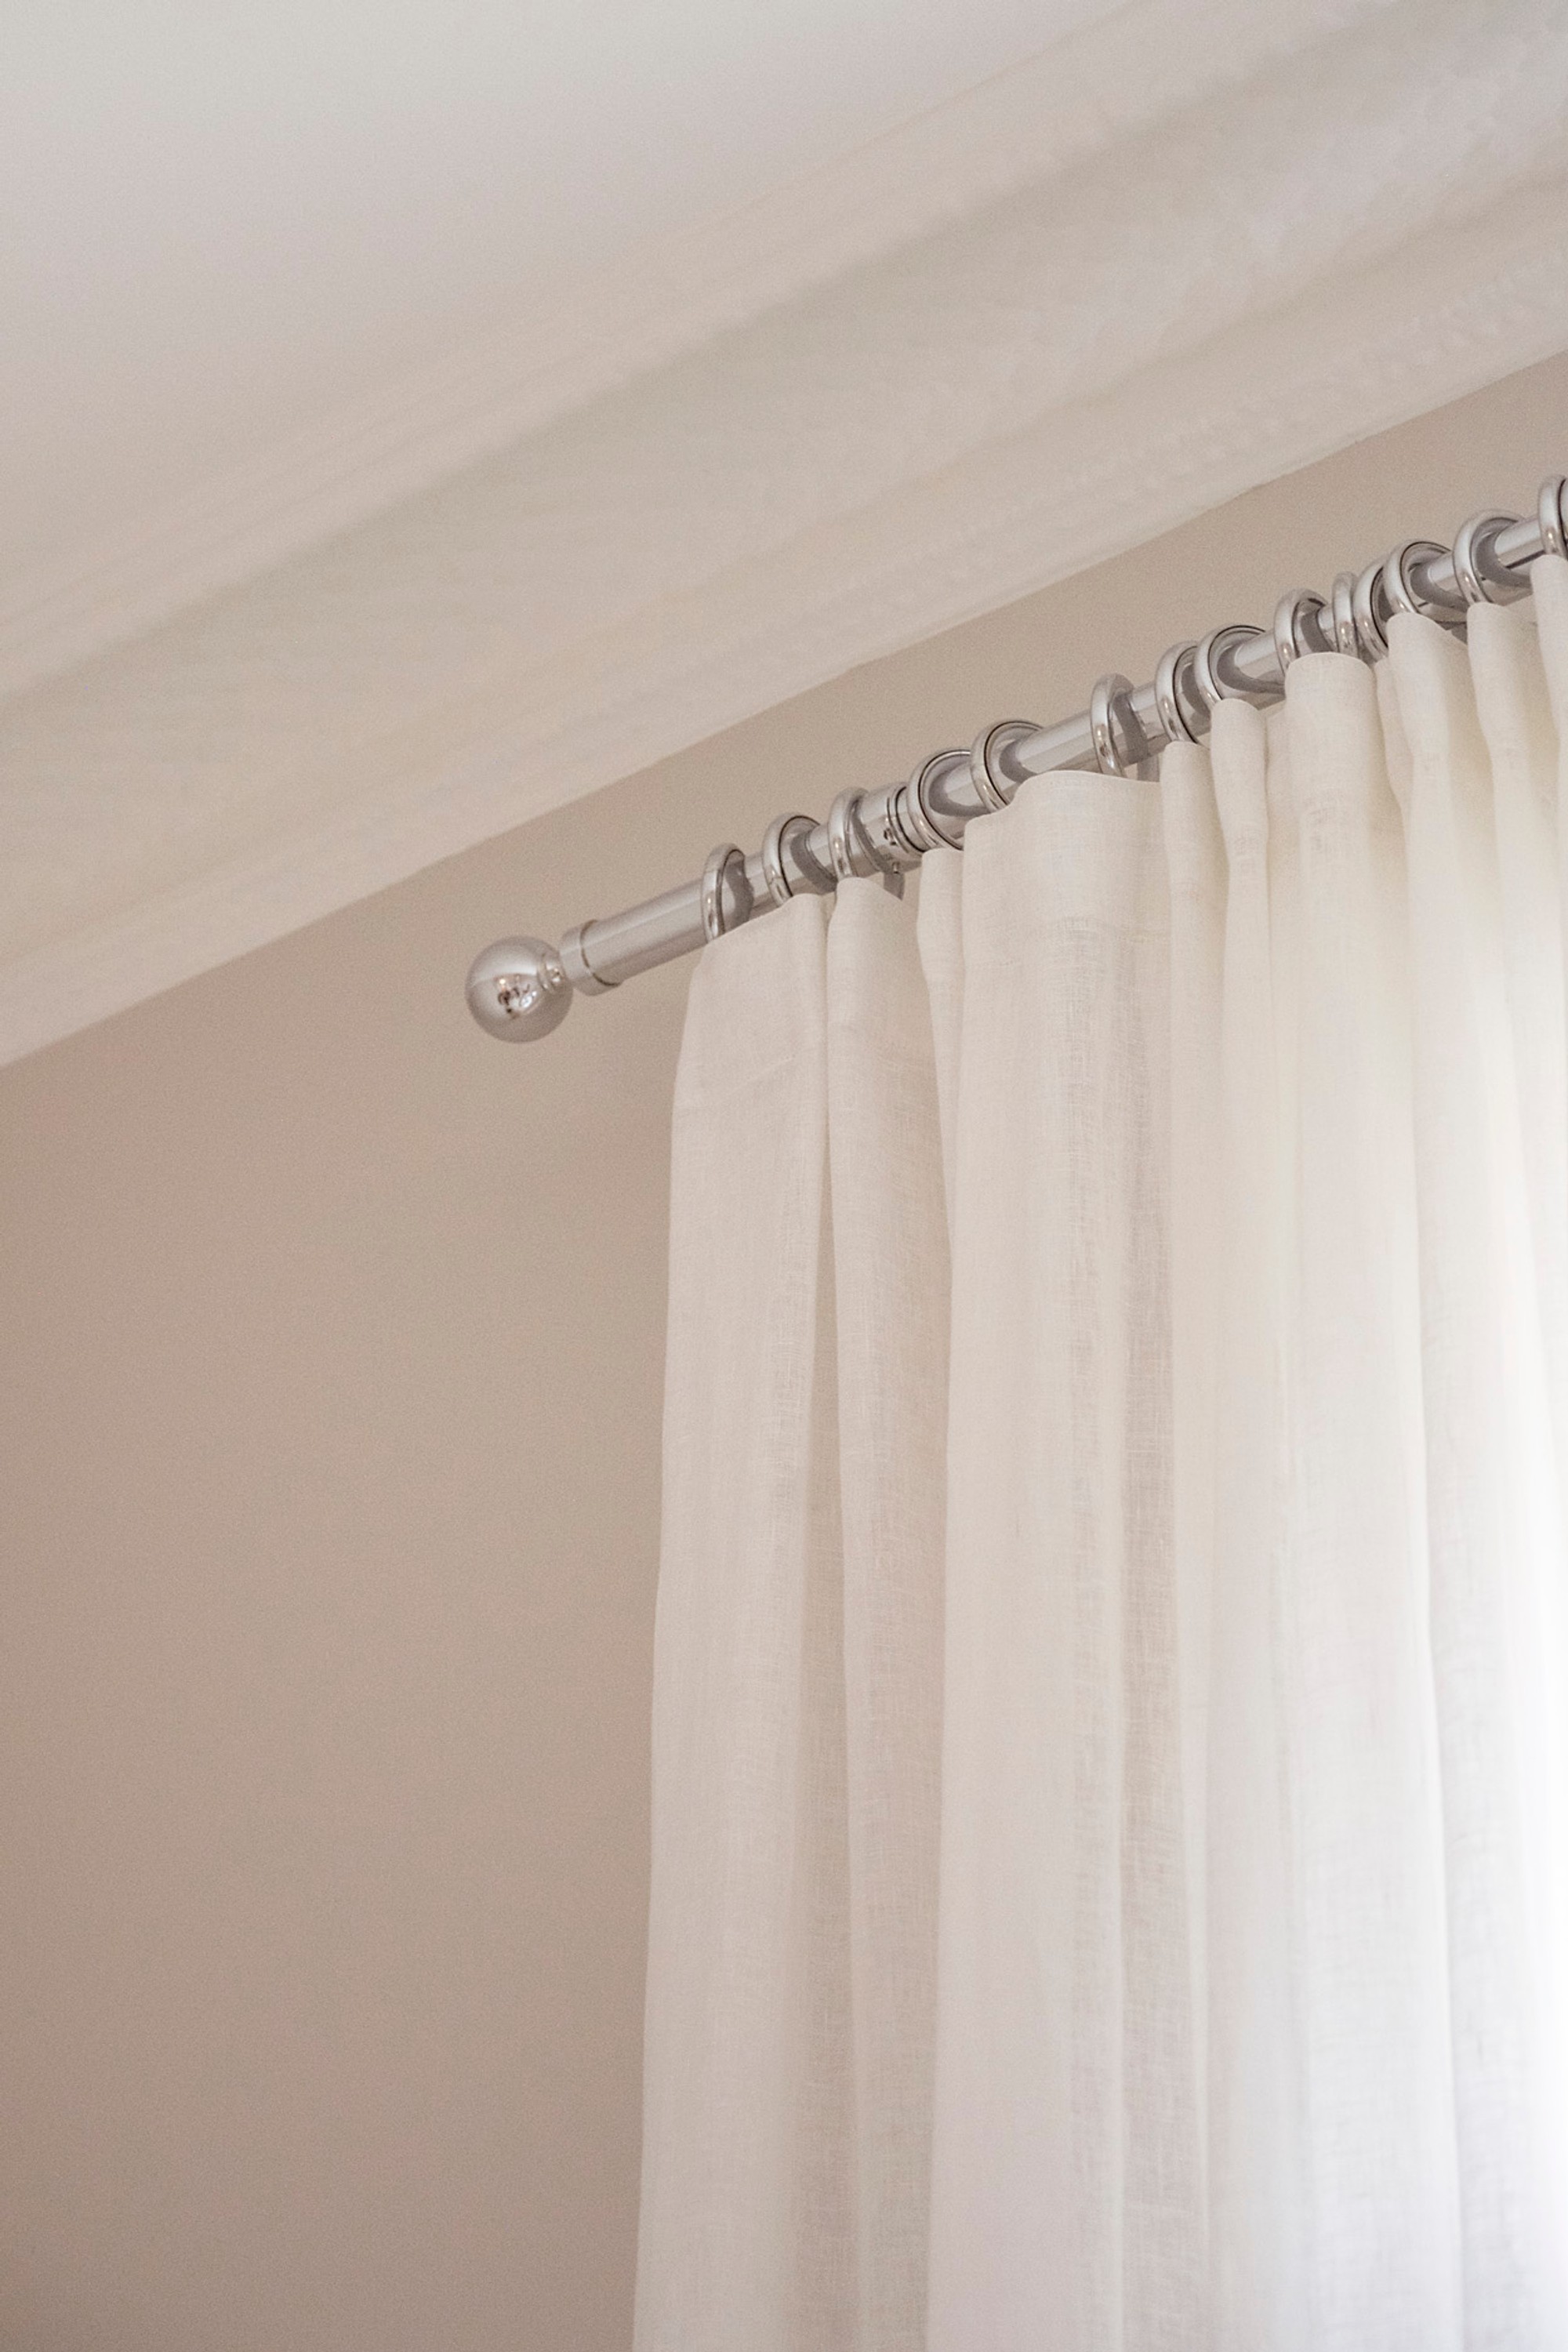 How to: Curtain Hooks